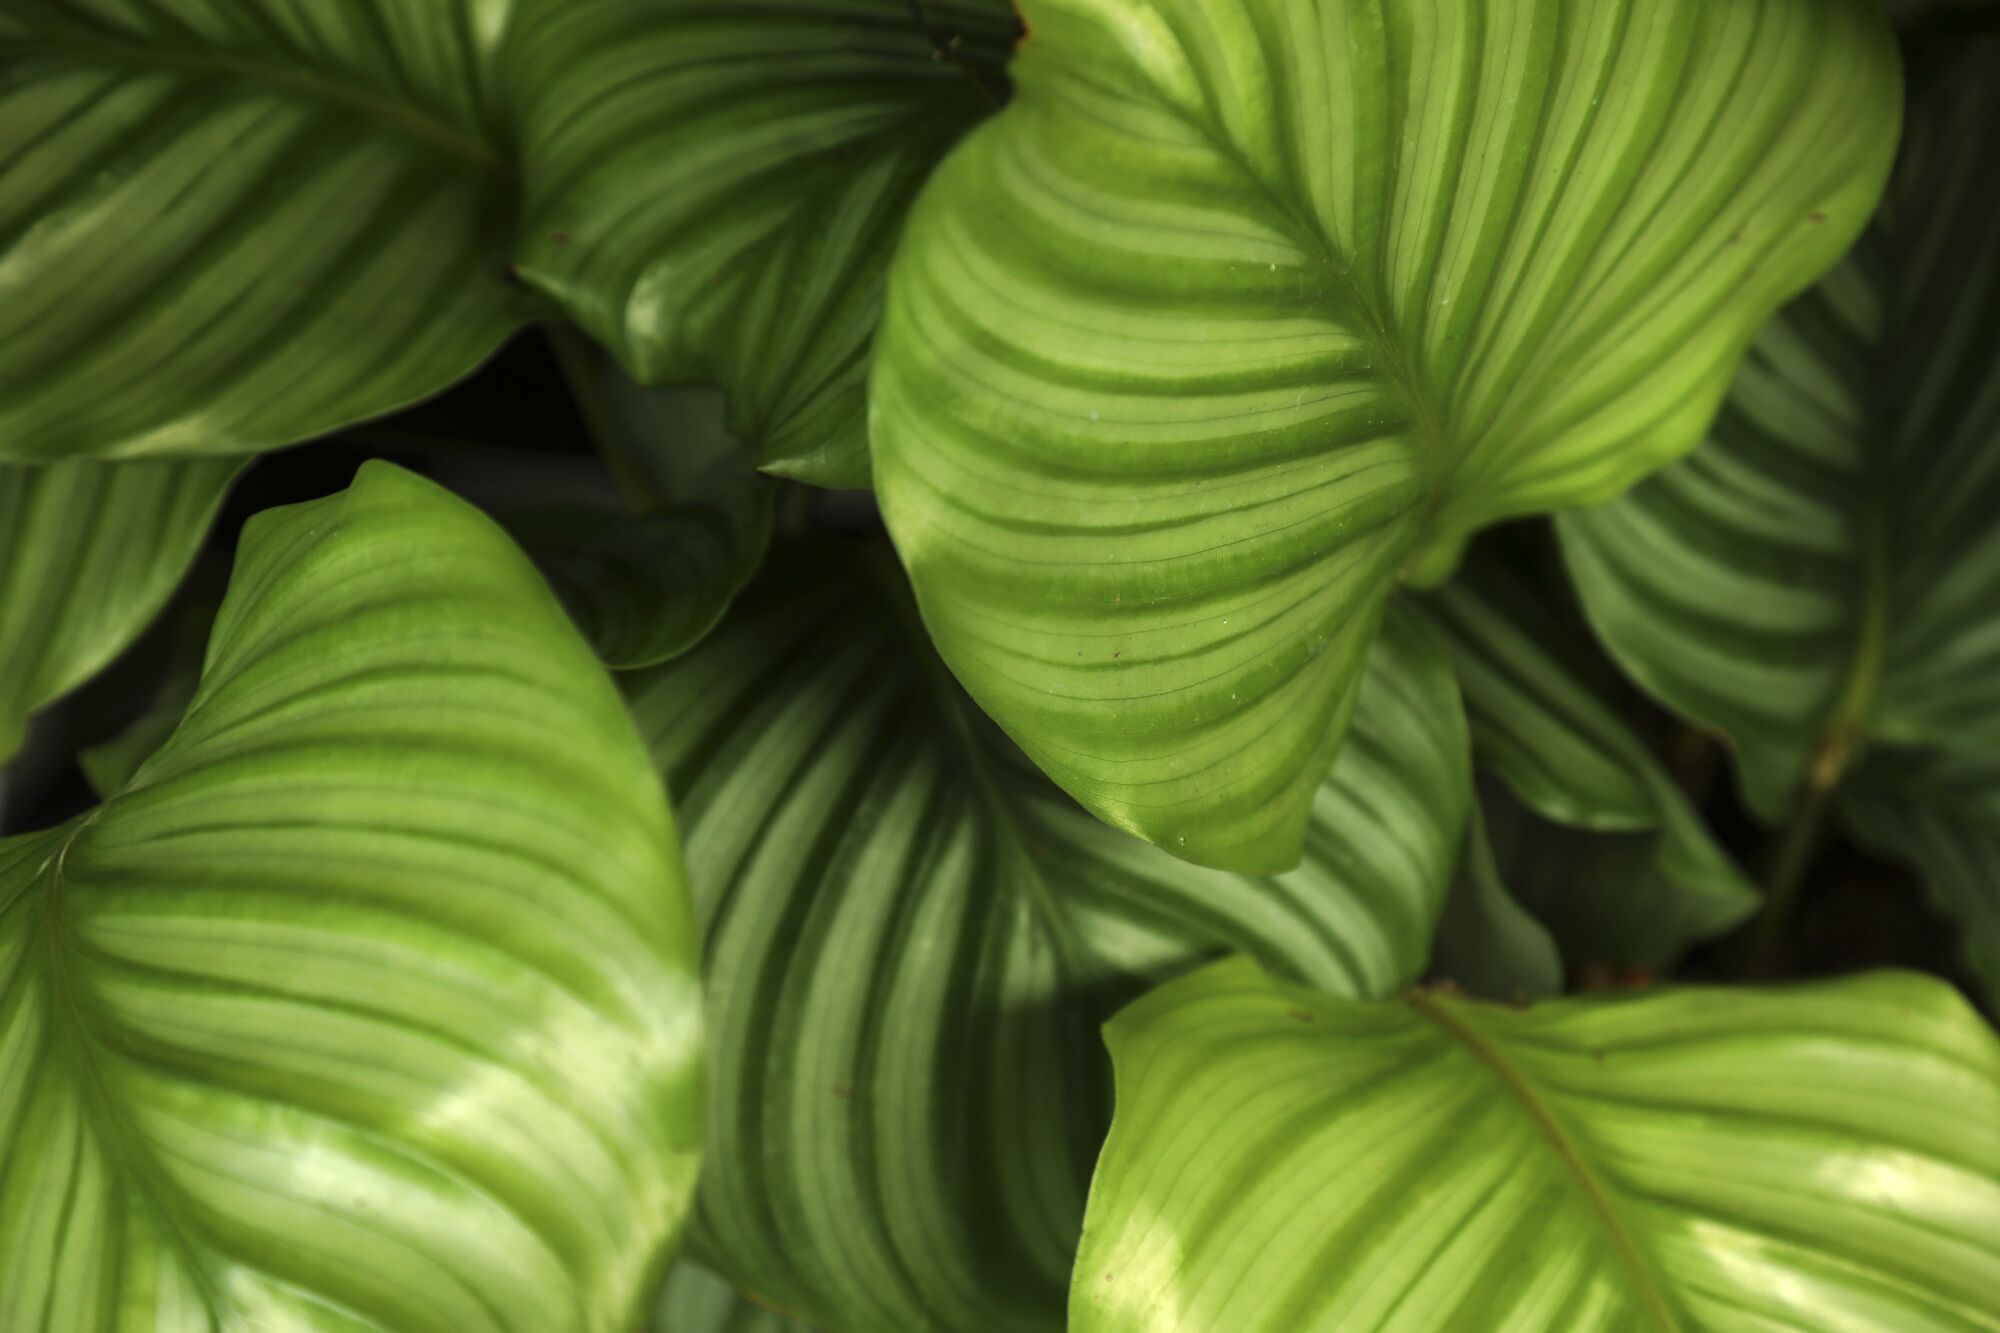 A detailed image of the striped leaves of the green, leafy Calathea orbifolia plant.